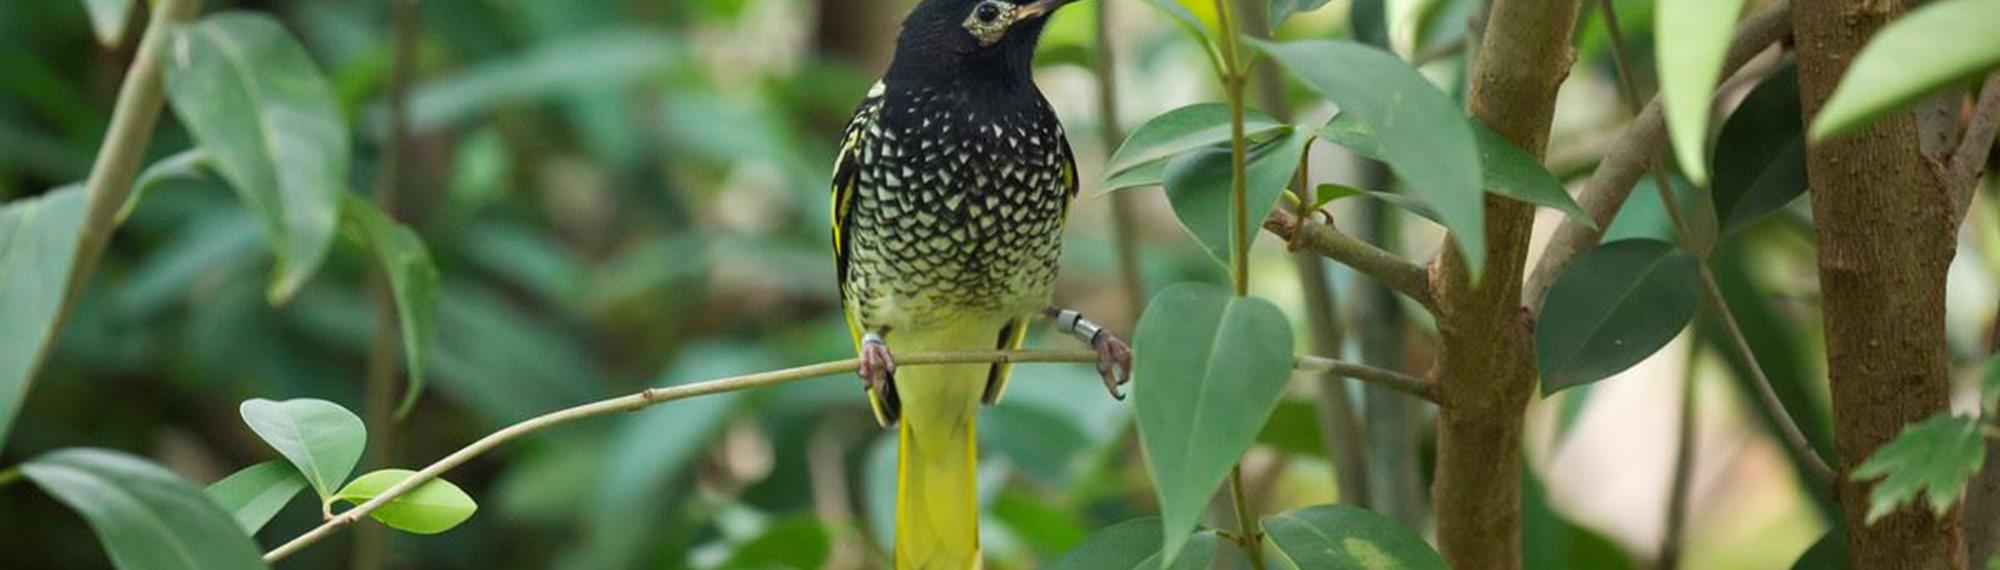 Regent Honeyeater with its black head and yellow speckled body with a yellow tail standing on a tree branch amongst the leaves.